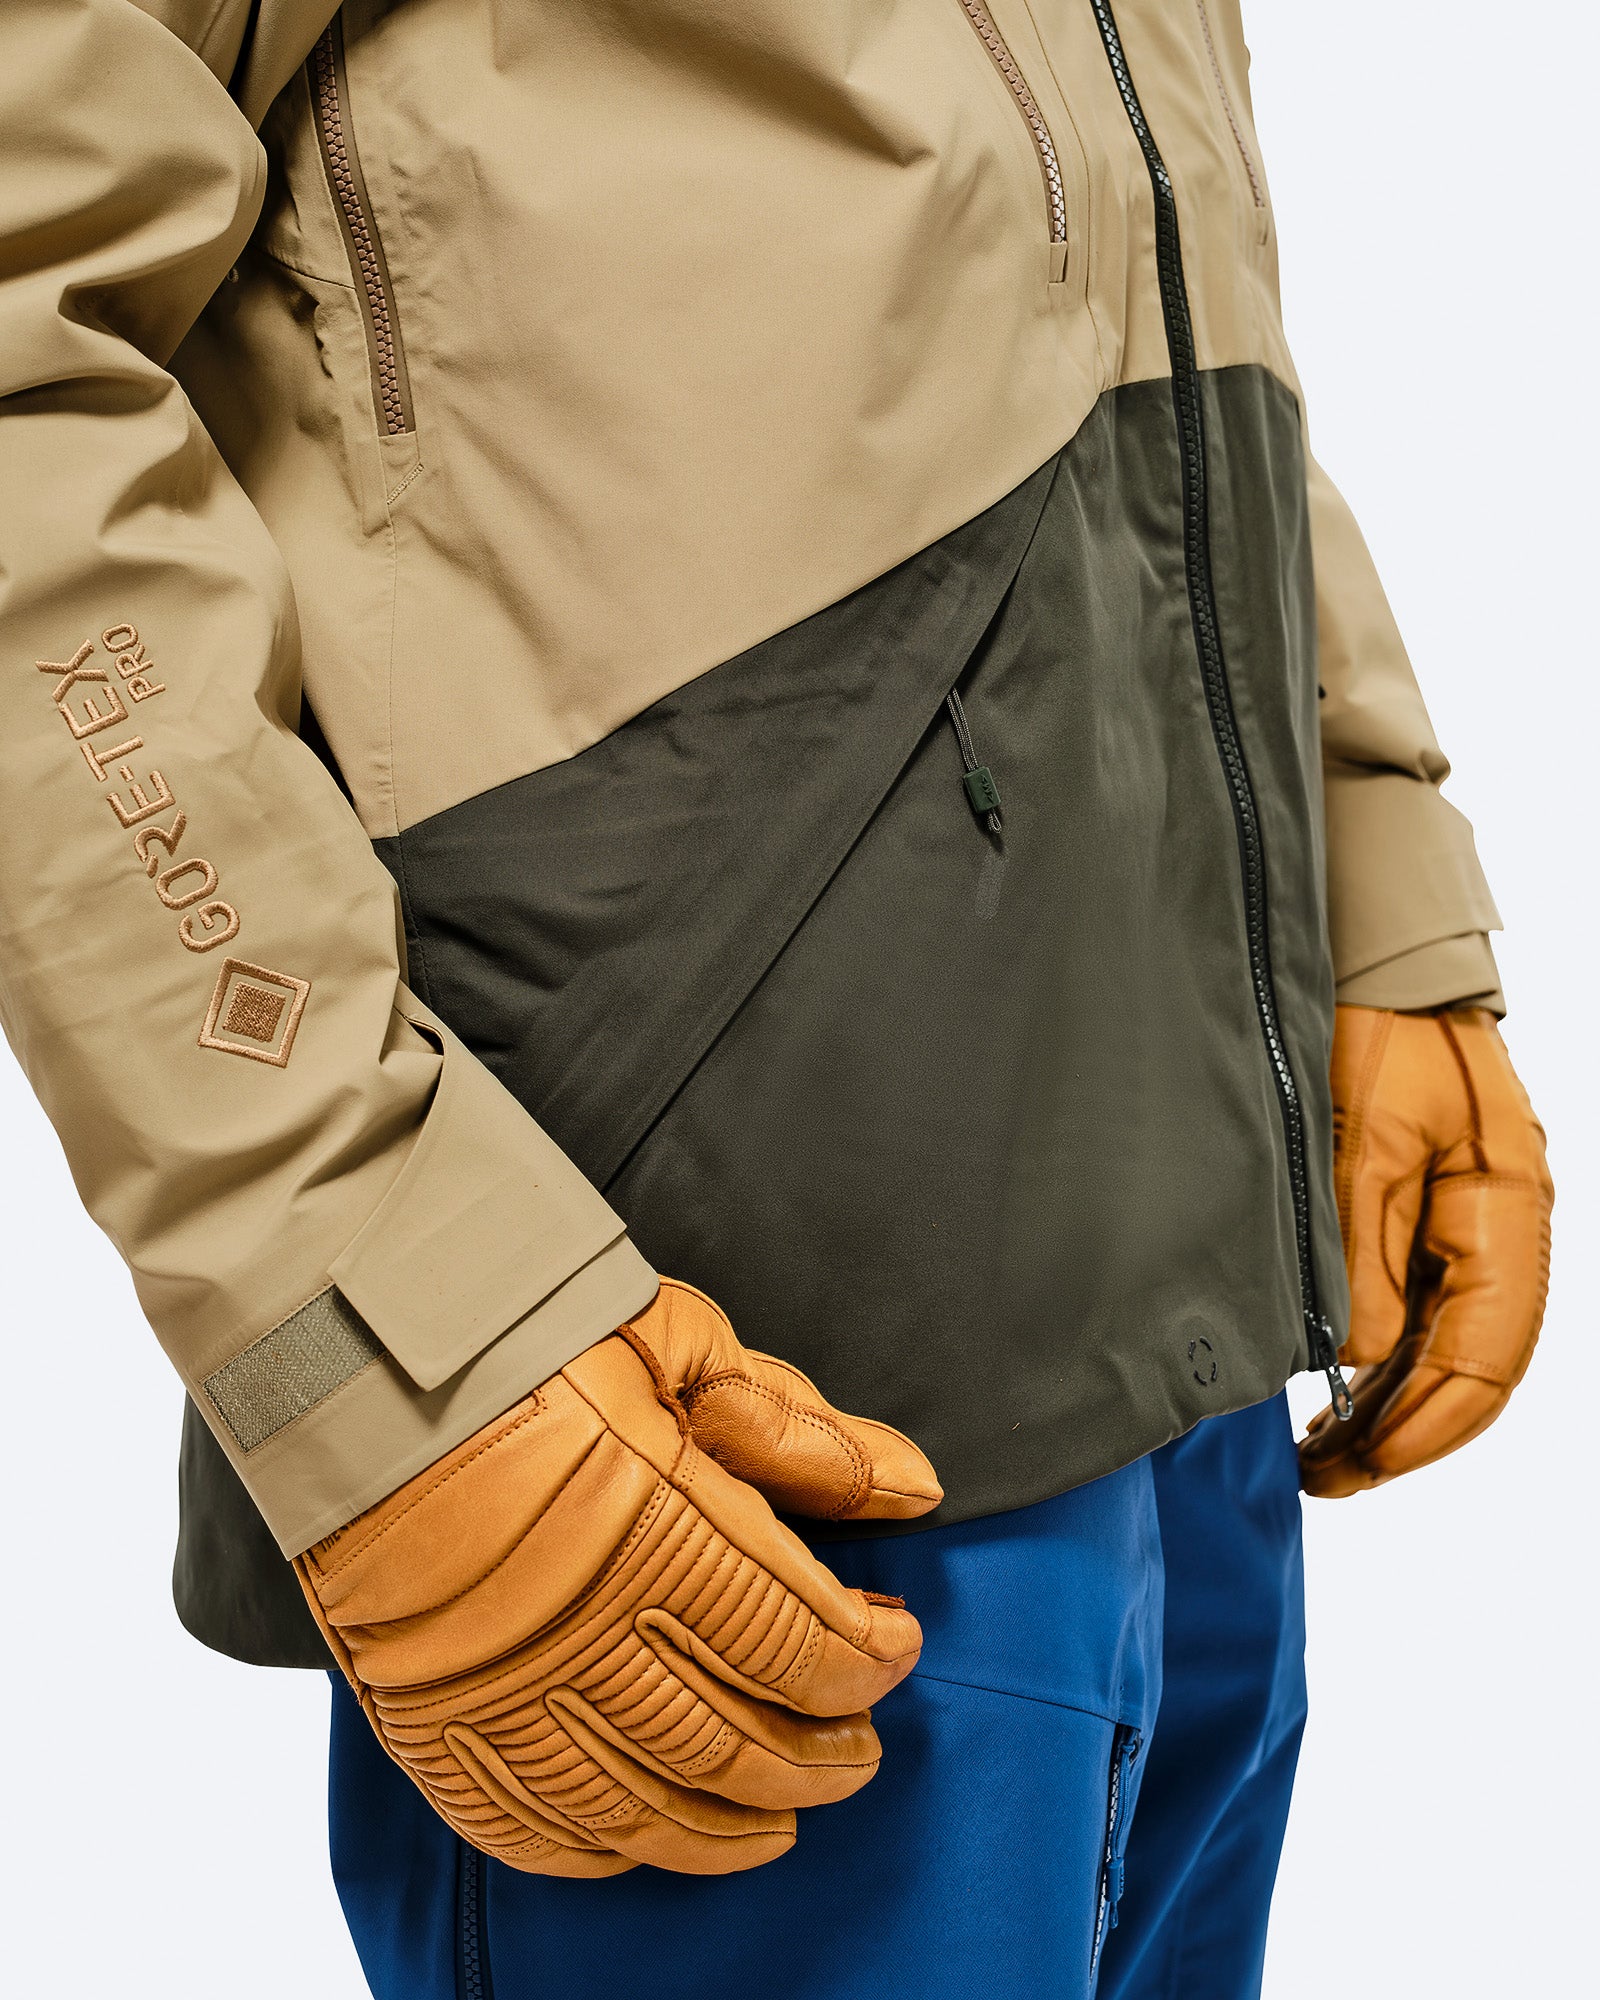 The 100 % seam taped 3-layer GORE-TEX® Pro provides ultimate waterproof, 
windproof and breathable protection.
Hand warmer pockets card image